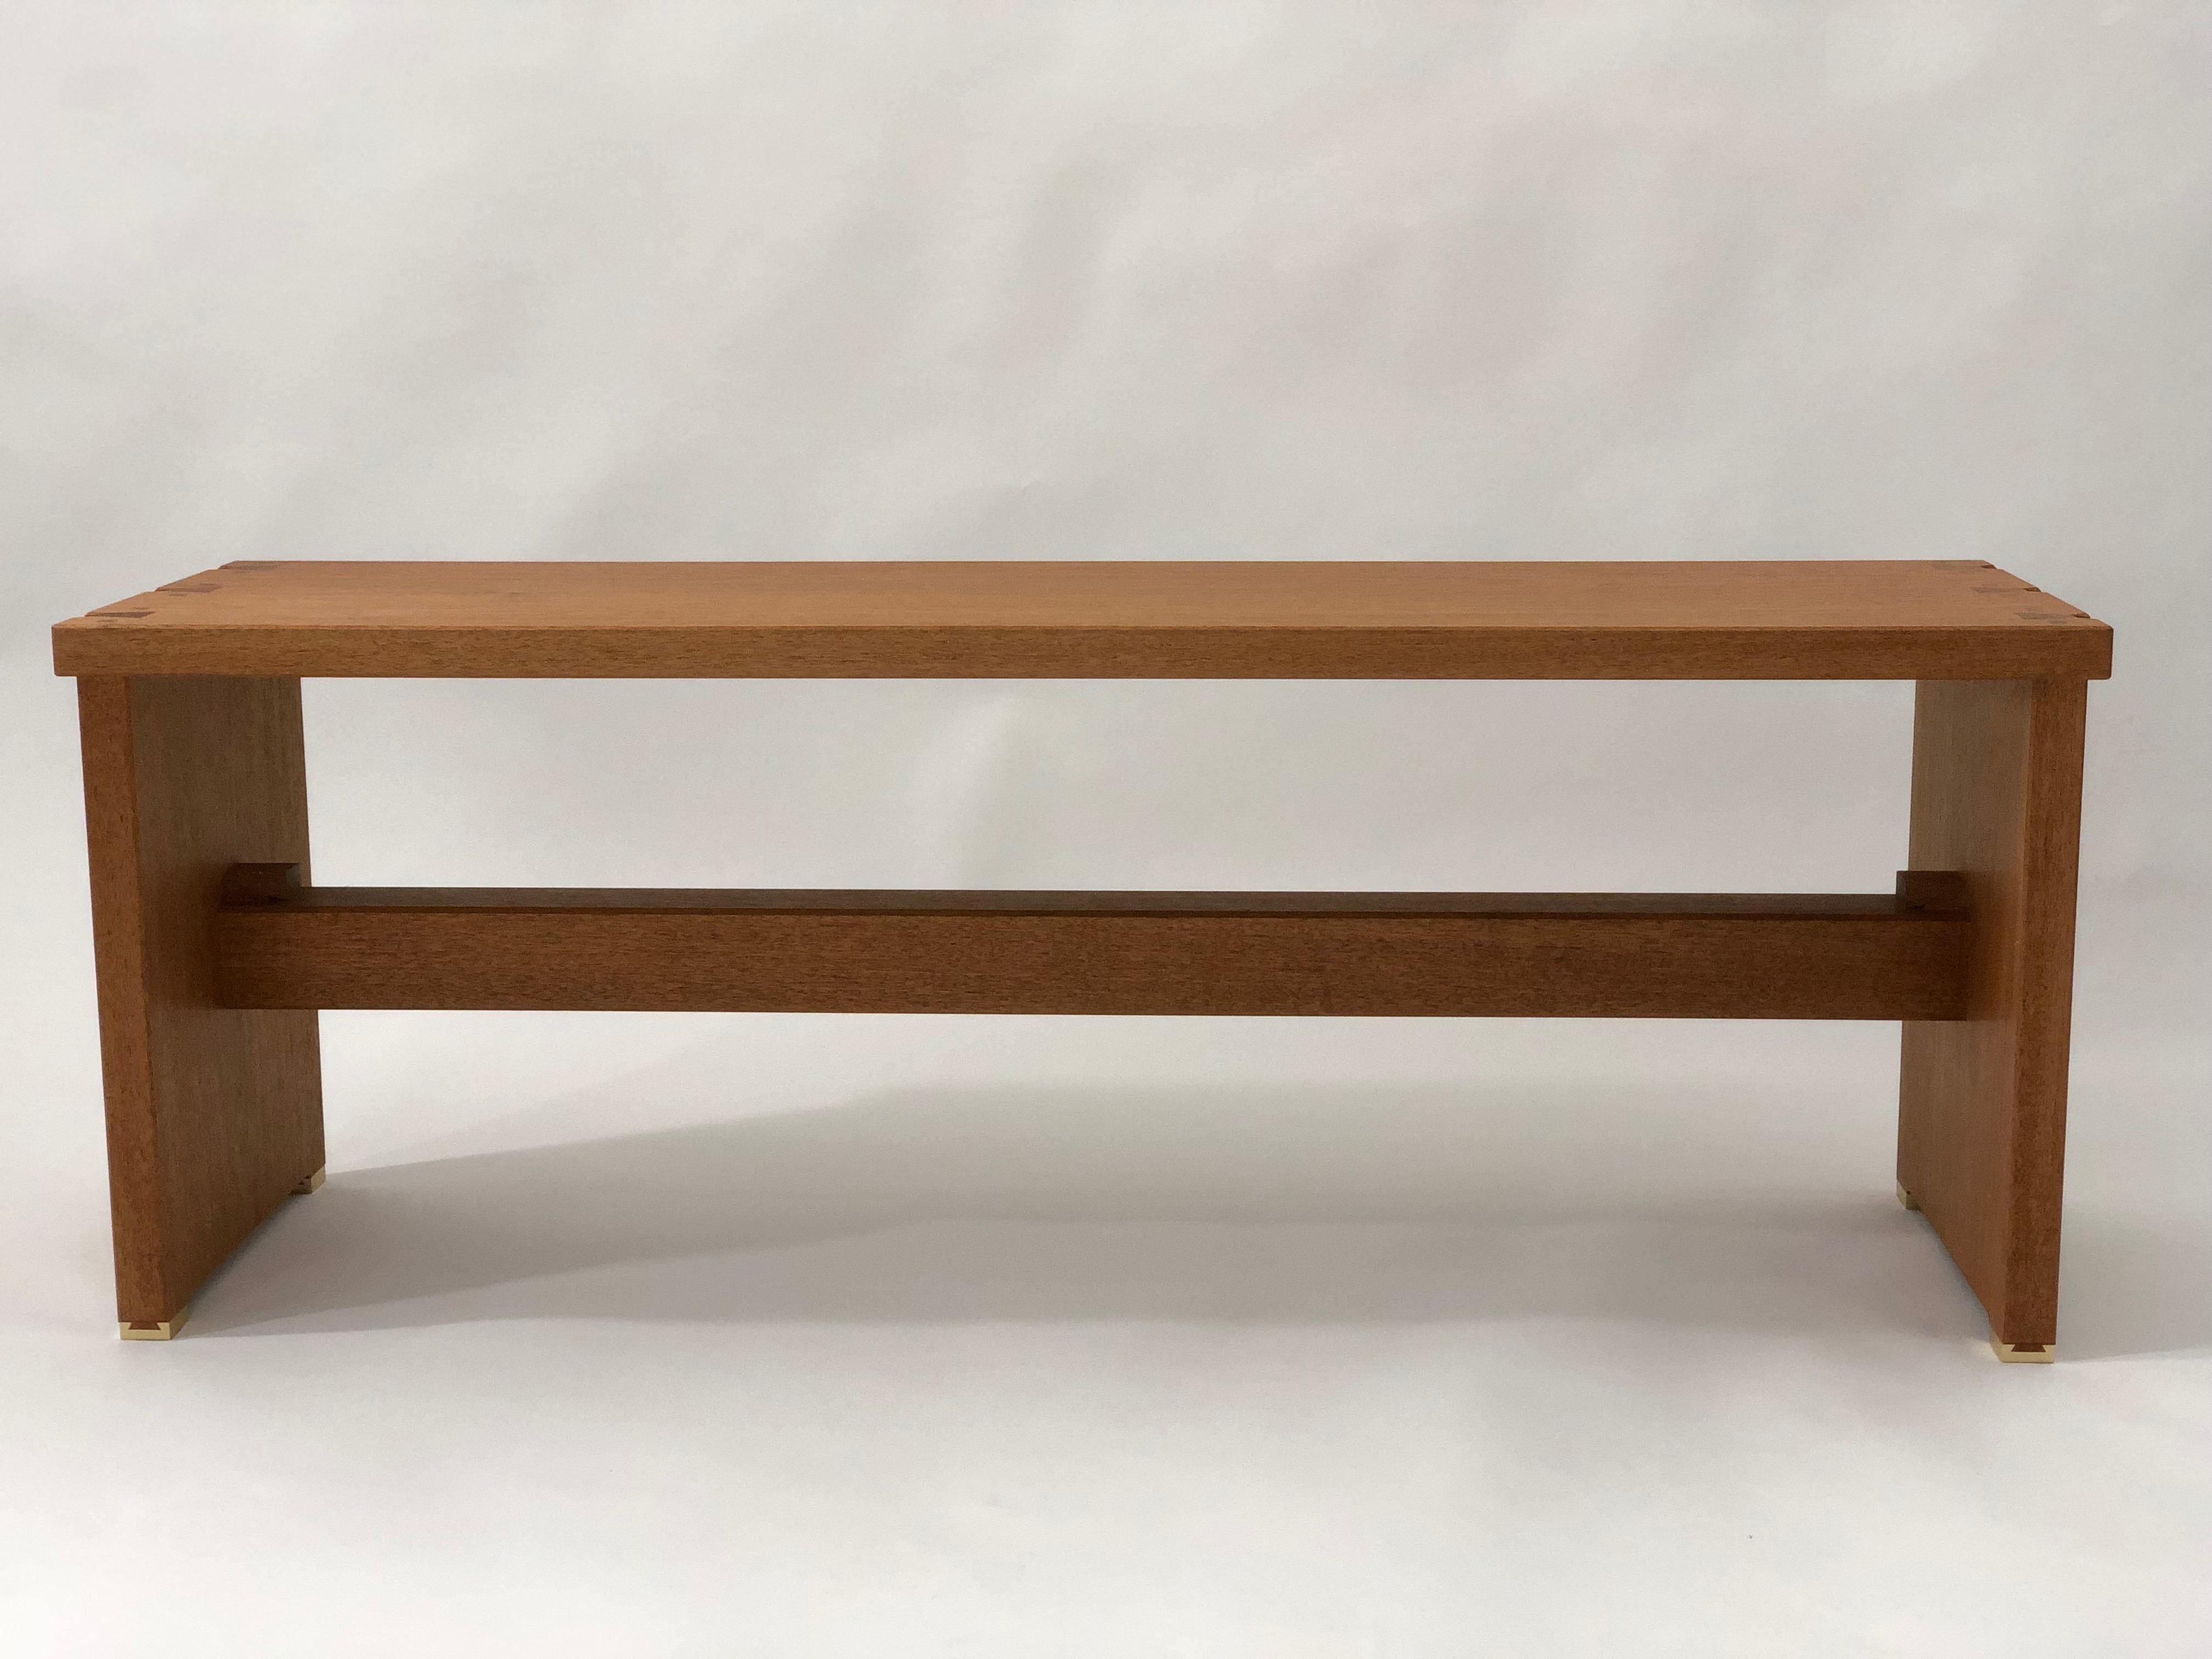 In designing this bench I took cues from sashimono, seeking a outwardly simple aesthetic which gives way to more elaborate detail upon a closer look. In building this bench I utilized joinery unique to Japanese timber carpentry. 

This bench